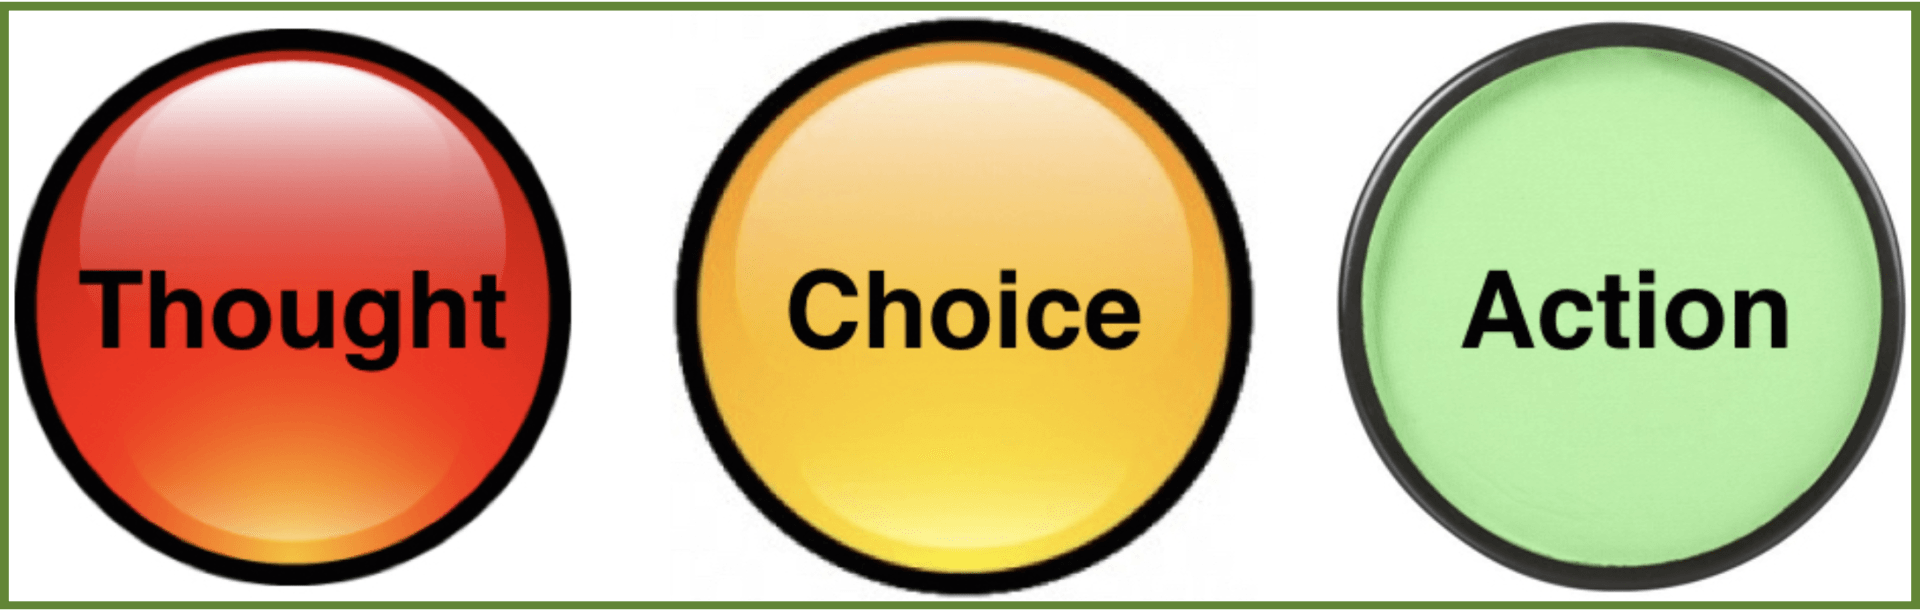 Thought choice action